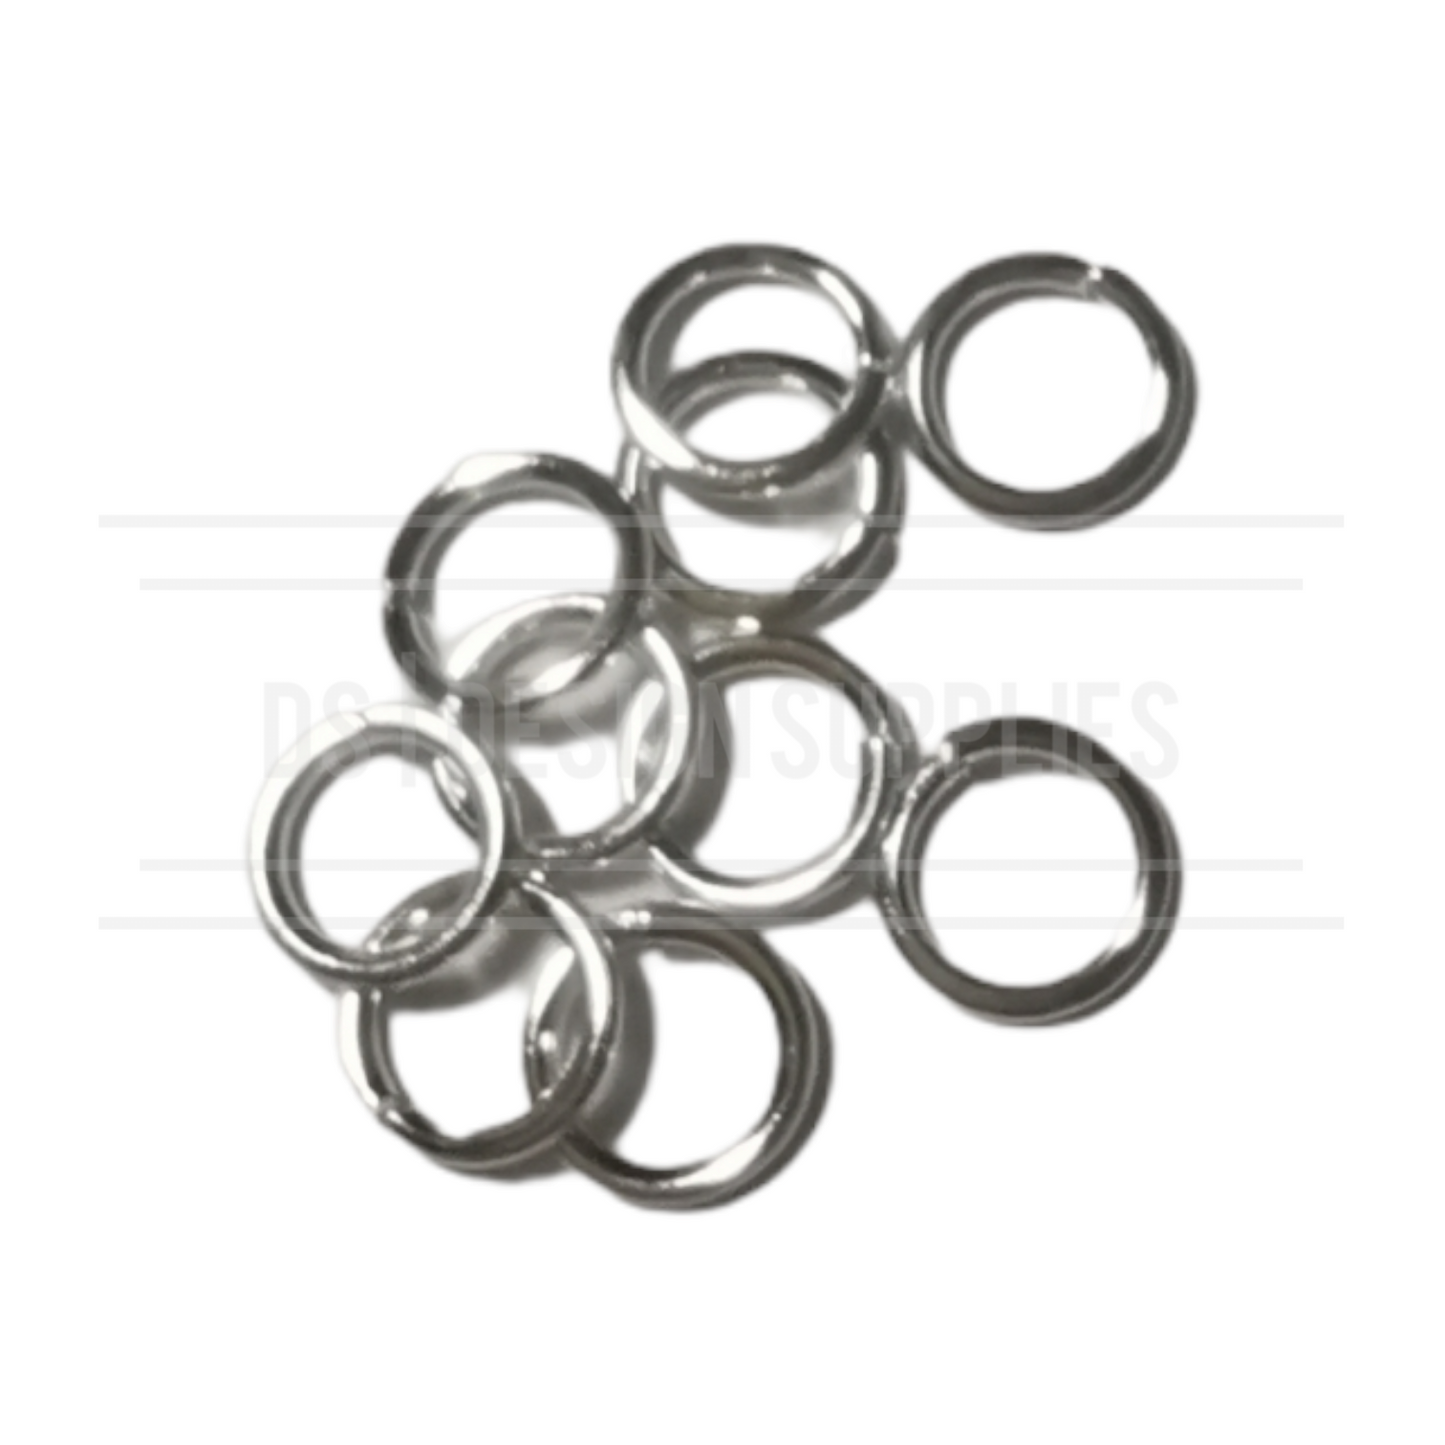 10 Jump Rings - Silver 5mm